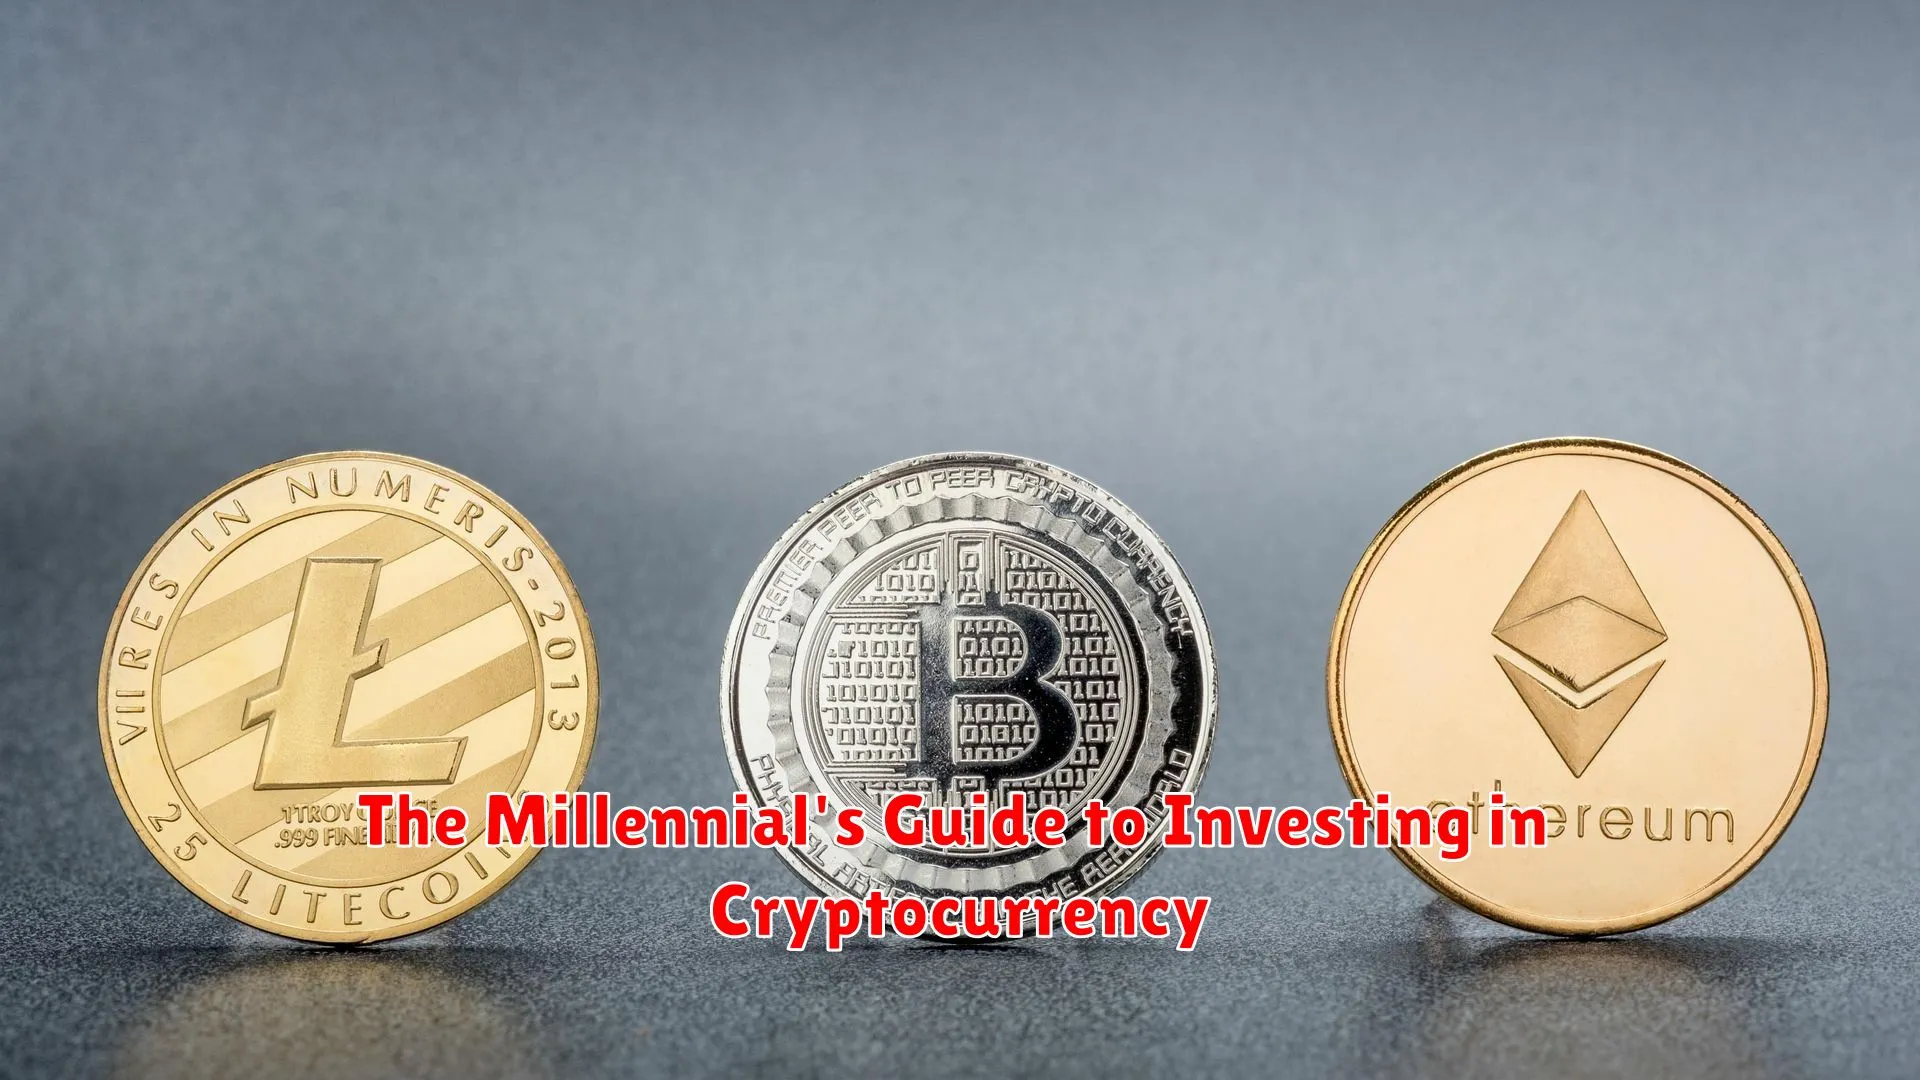 The Millennial's Guide to Investing in Cryptocurrency